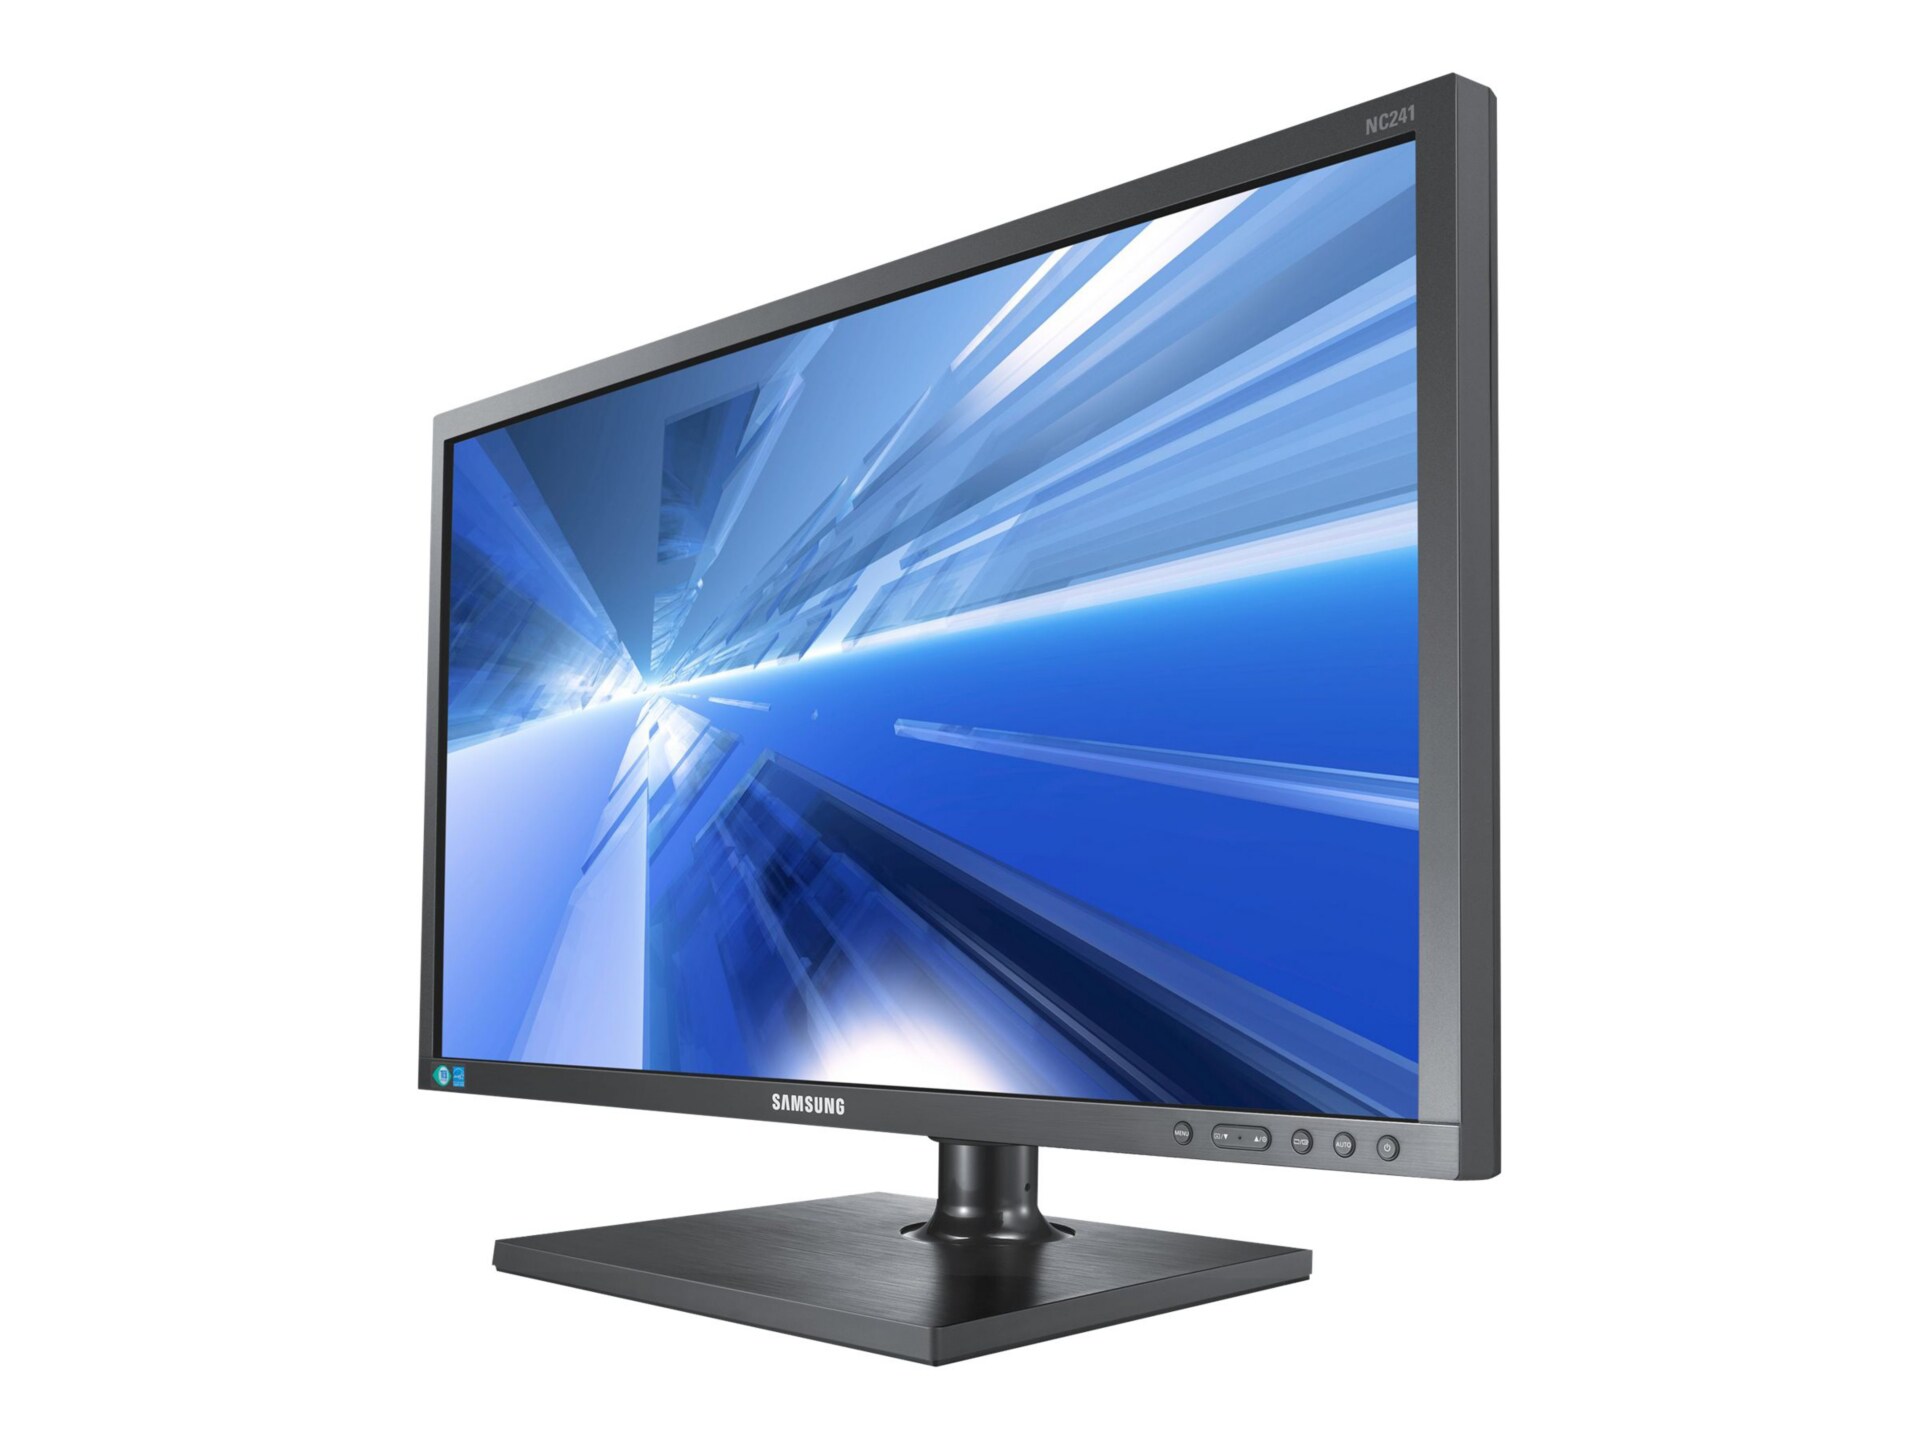 Samsung NC Series Zero Client Display NC241-TS - all-in-one - Tera2321 - 32 MB - 0 GB - LED 23.6"